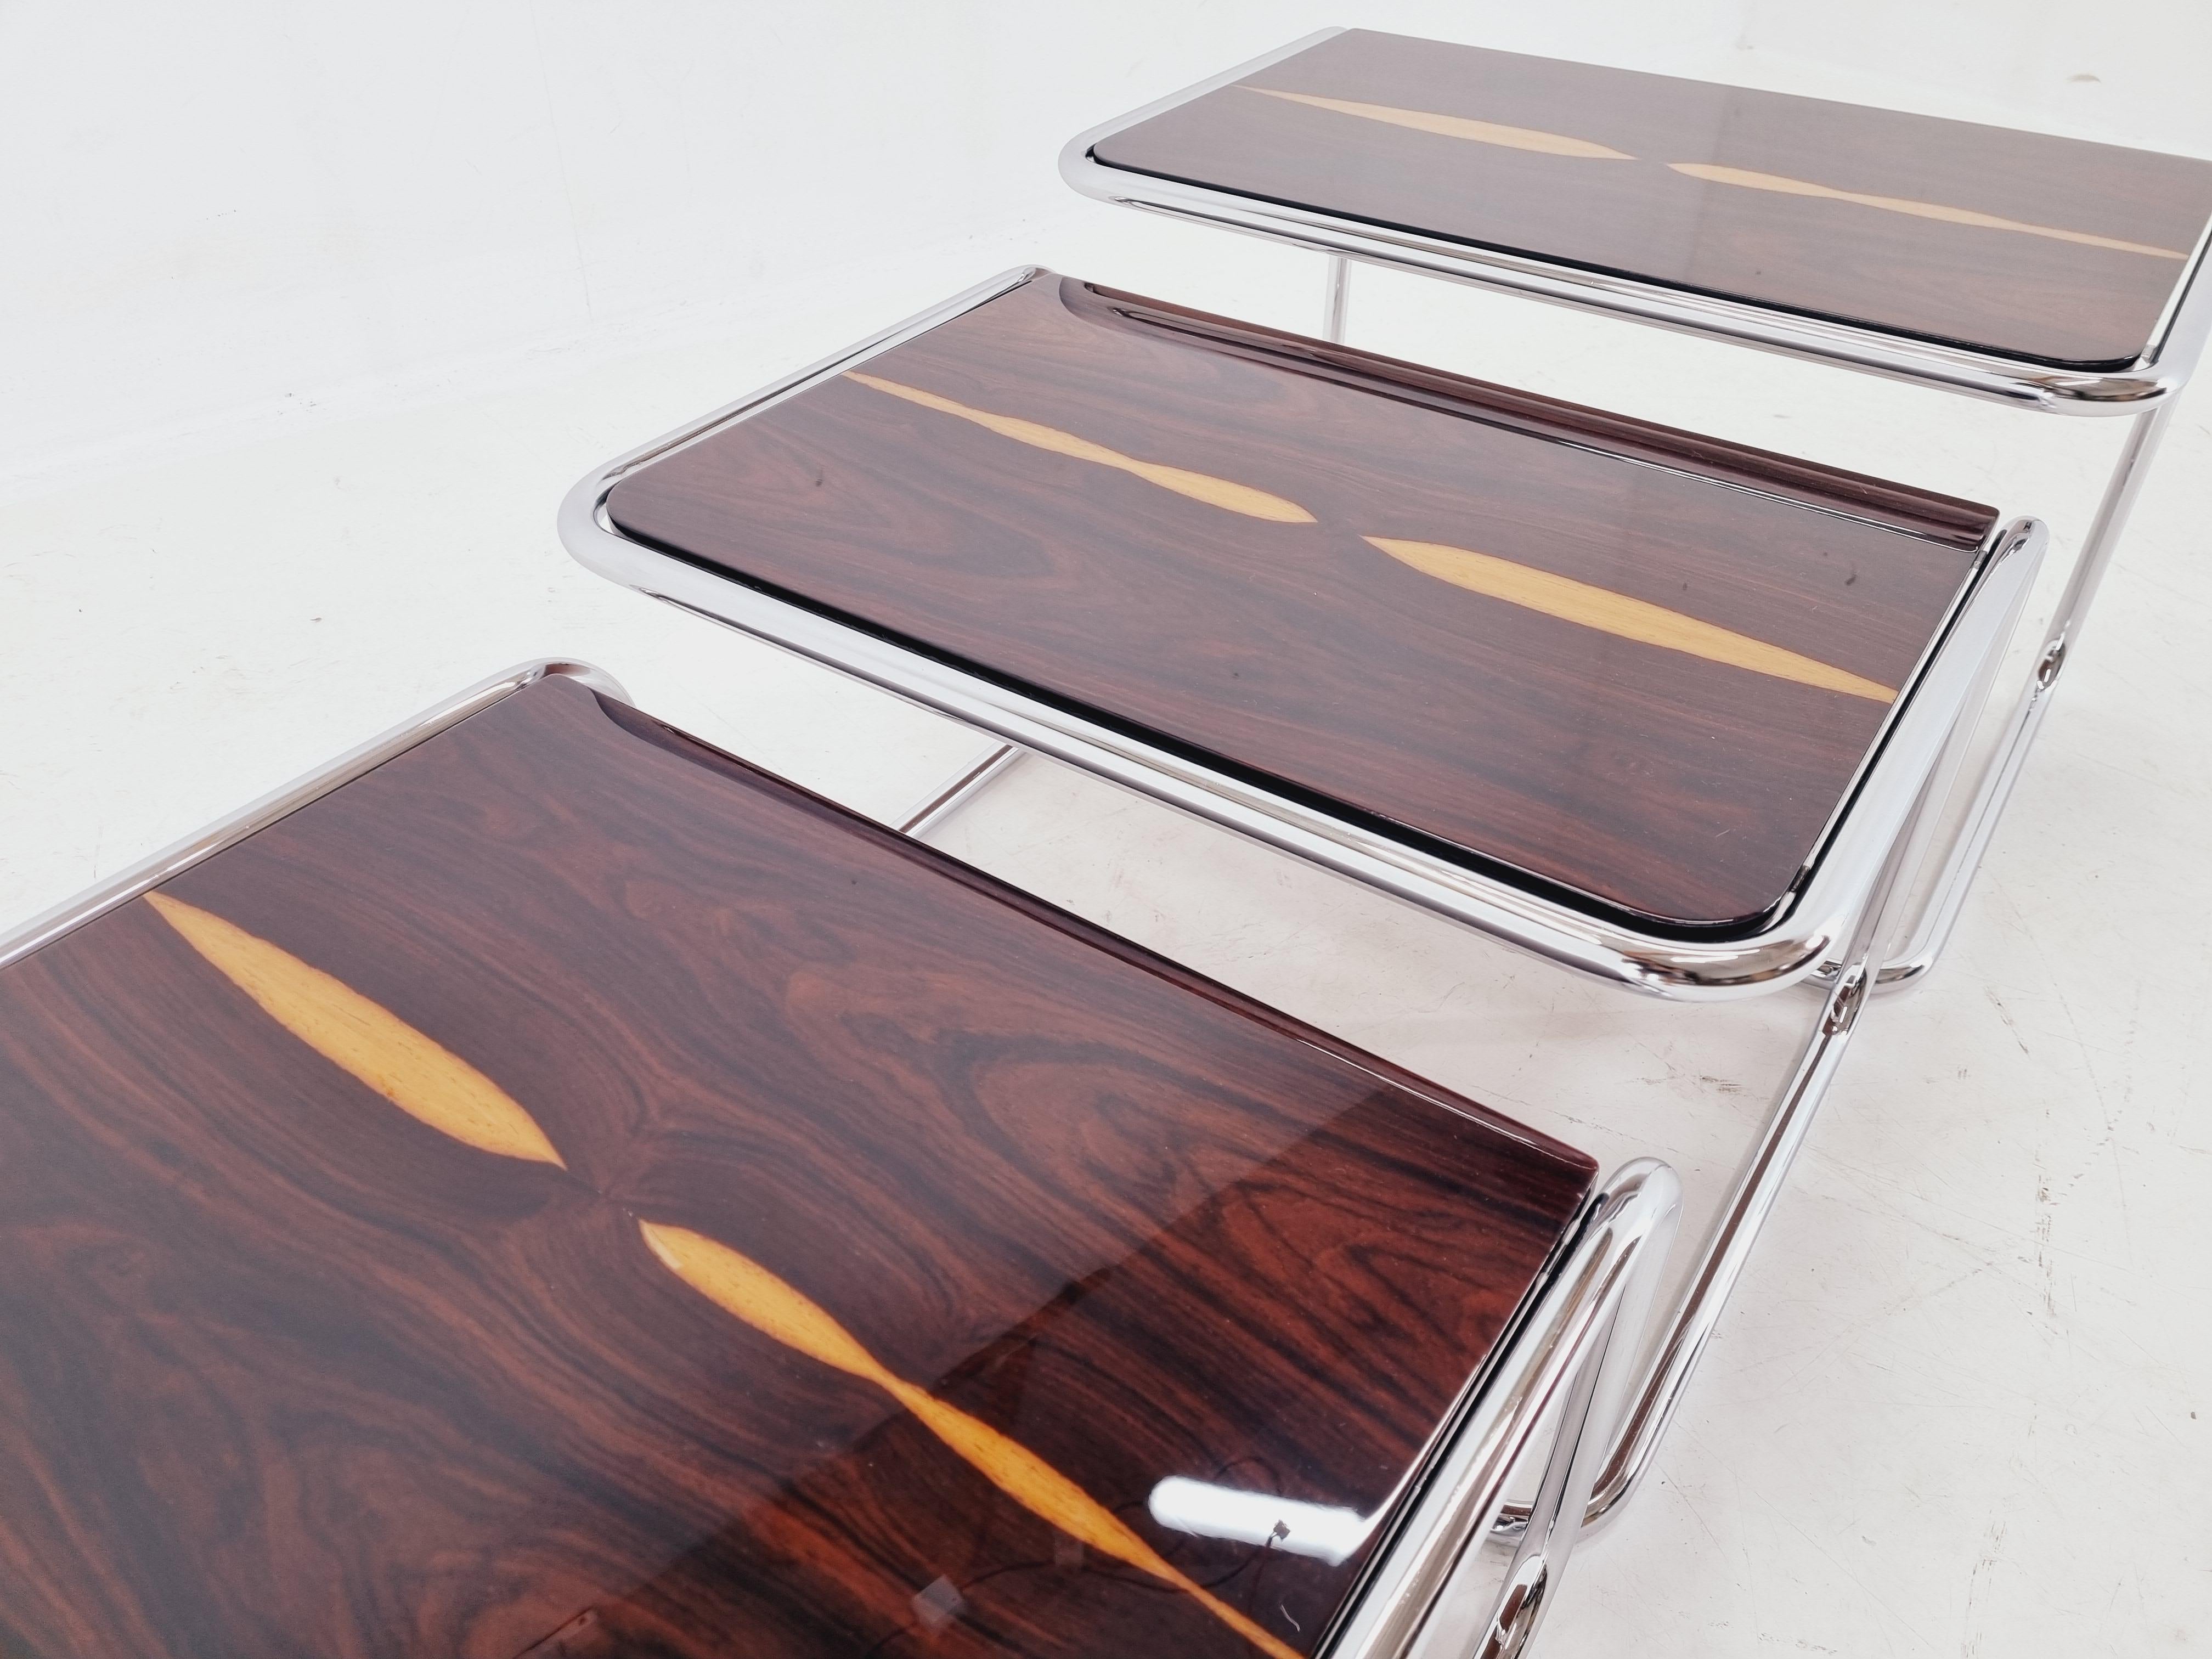 Mid-20th Century Exclusive Rare Midcentury Nesting Tables, Cocobolo Palisandr and Chrome, 1950s. For Sale